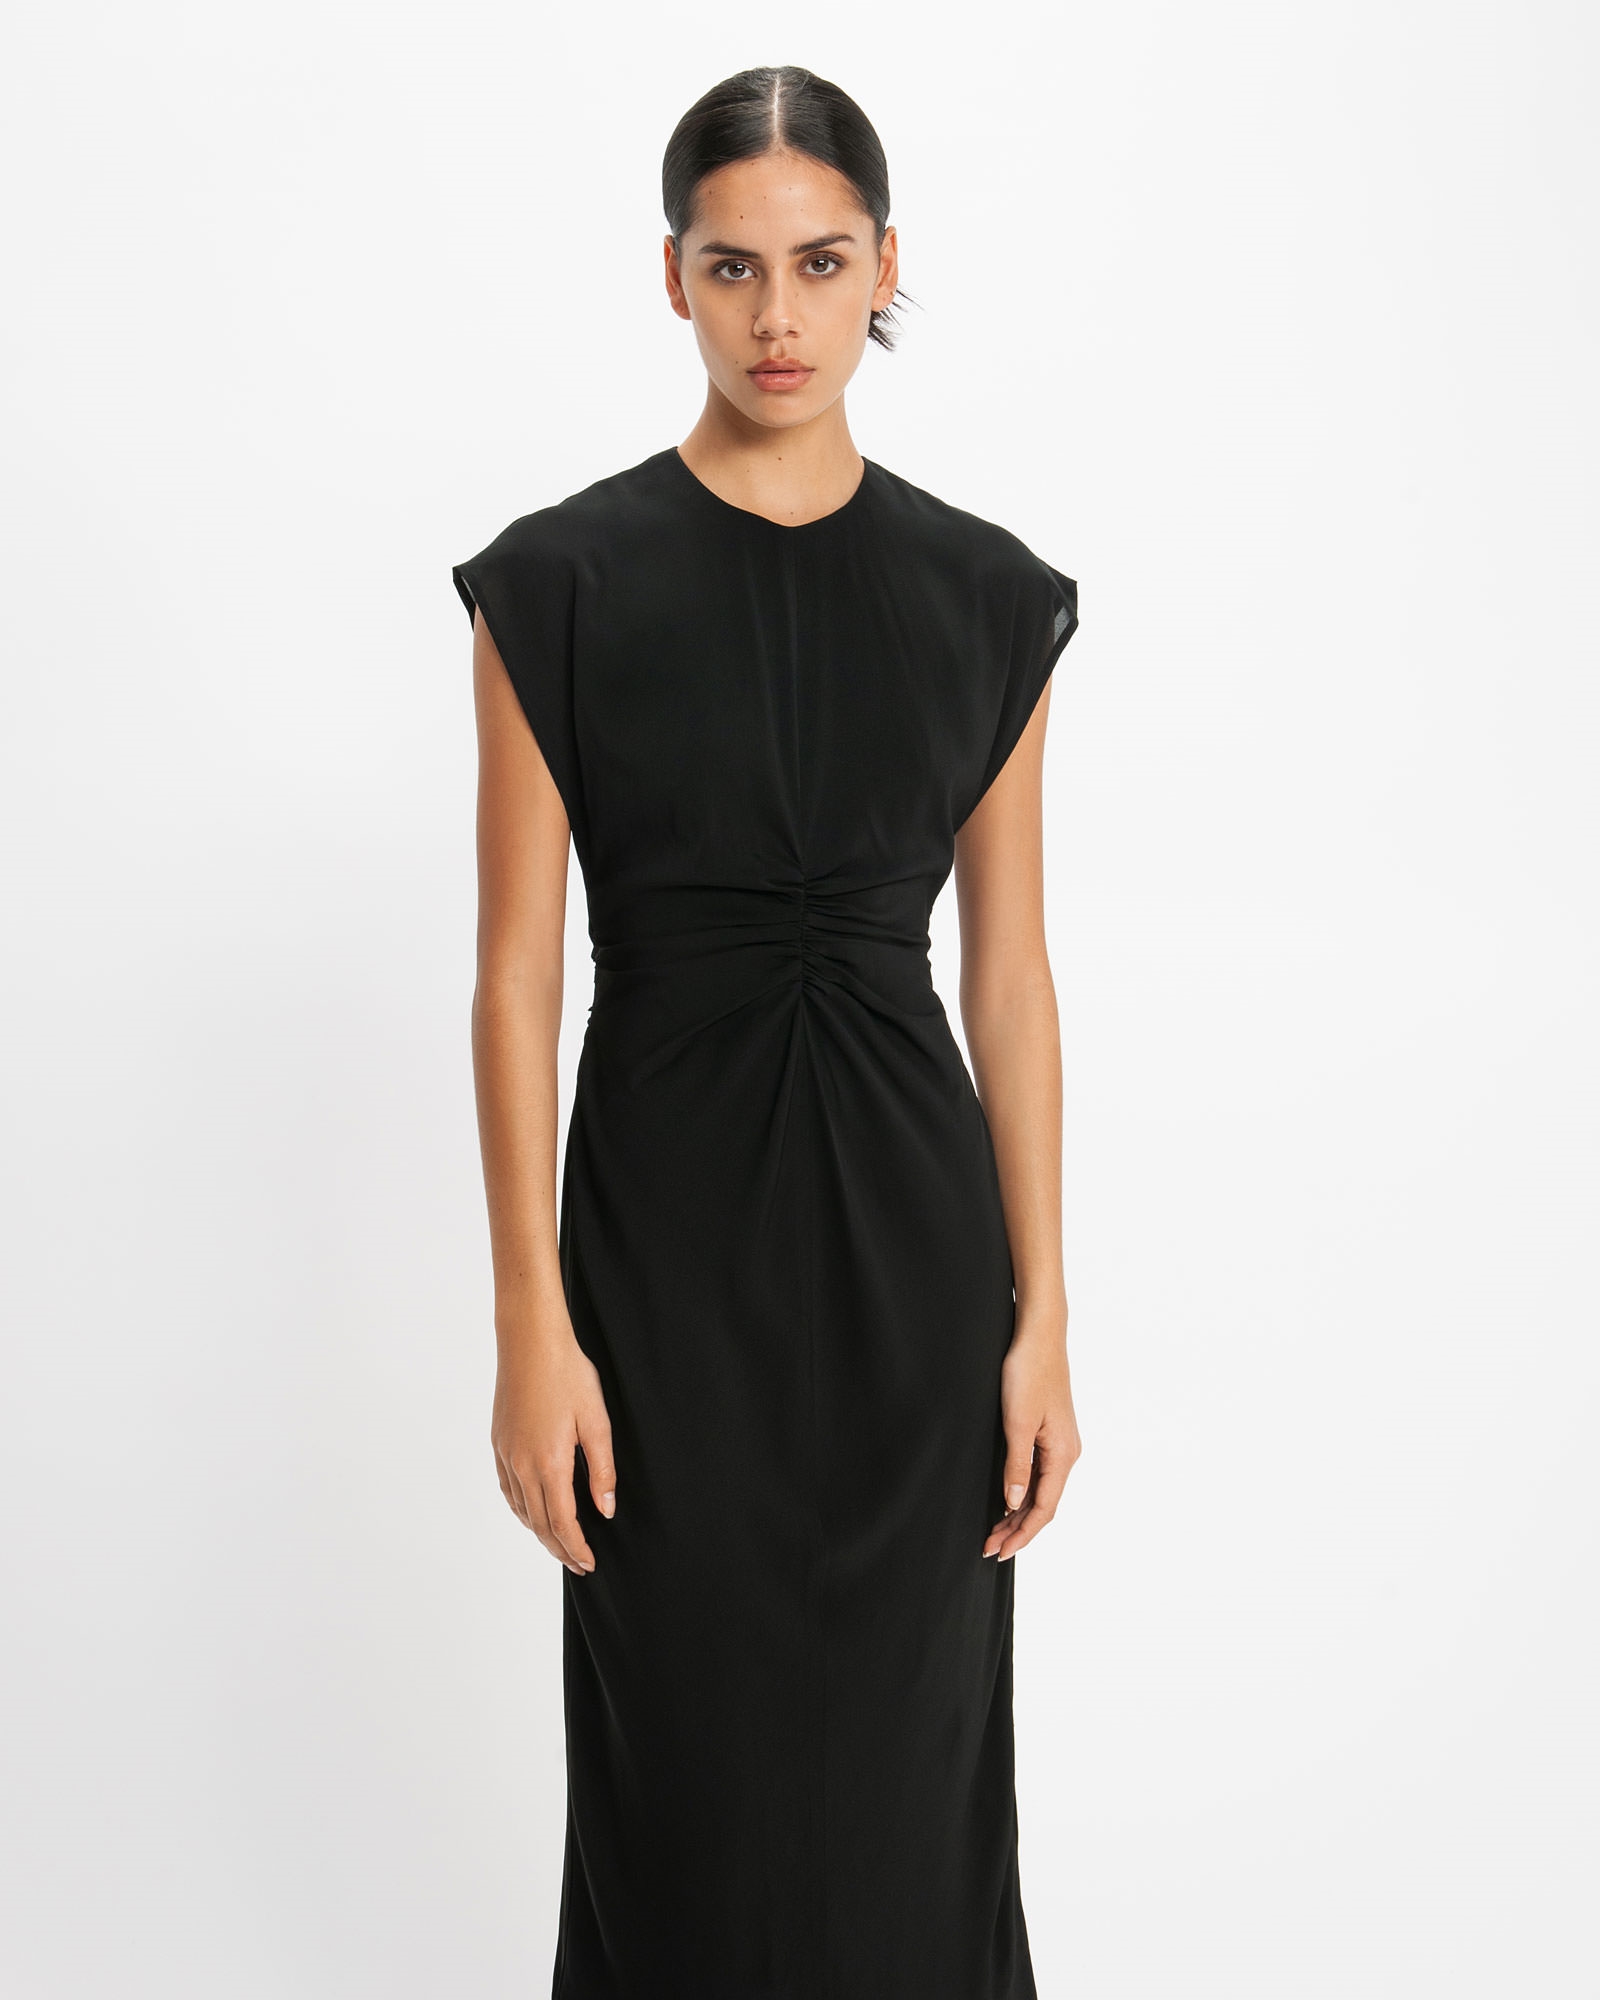 Ruched Front Midi Dress | Buy Dresses Online - Cue